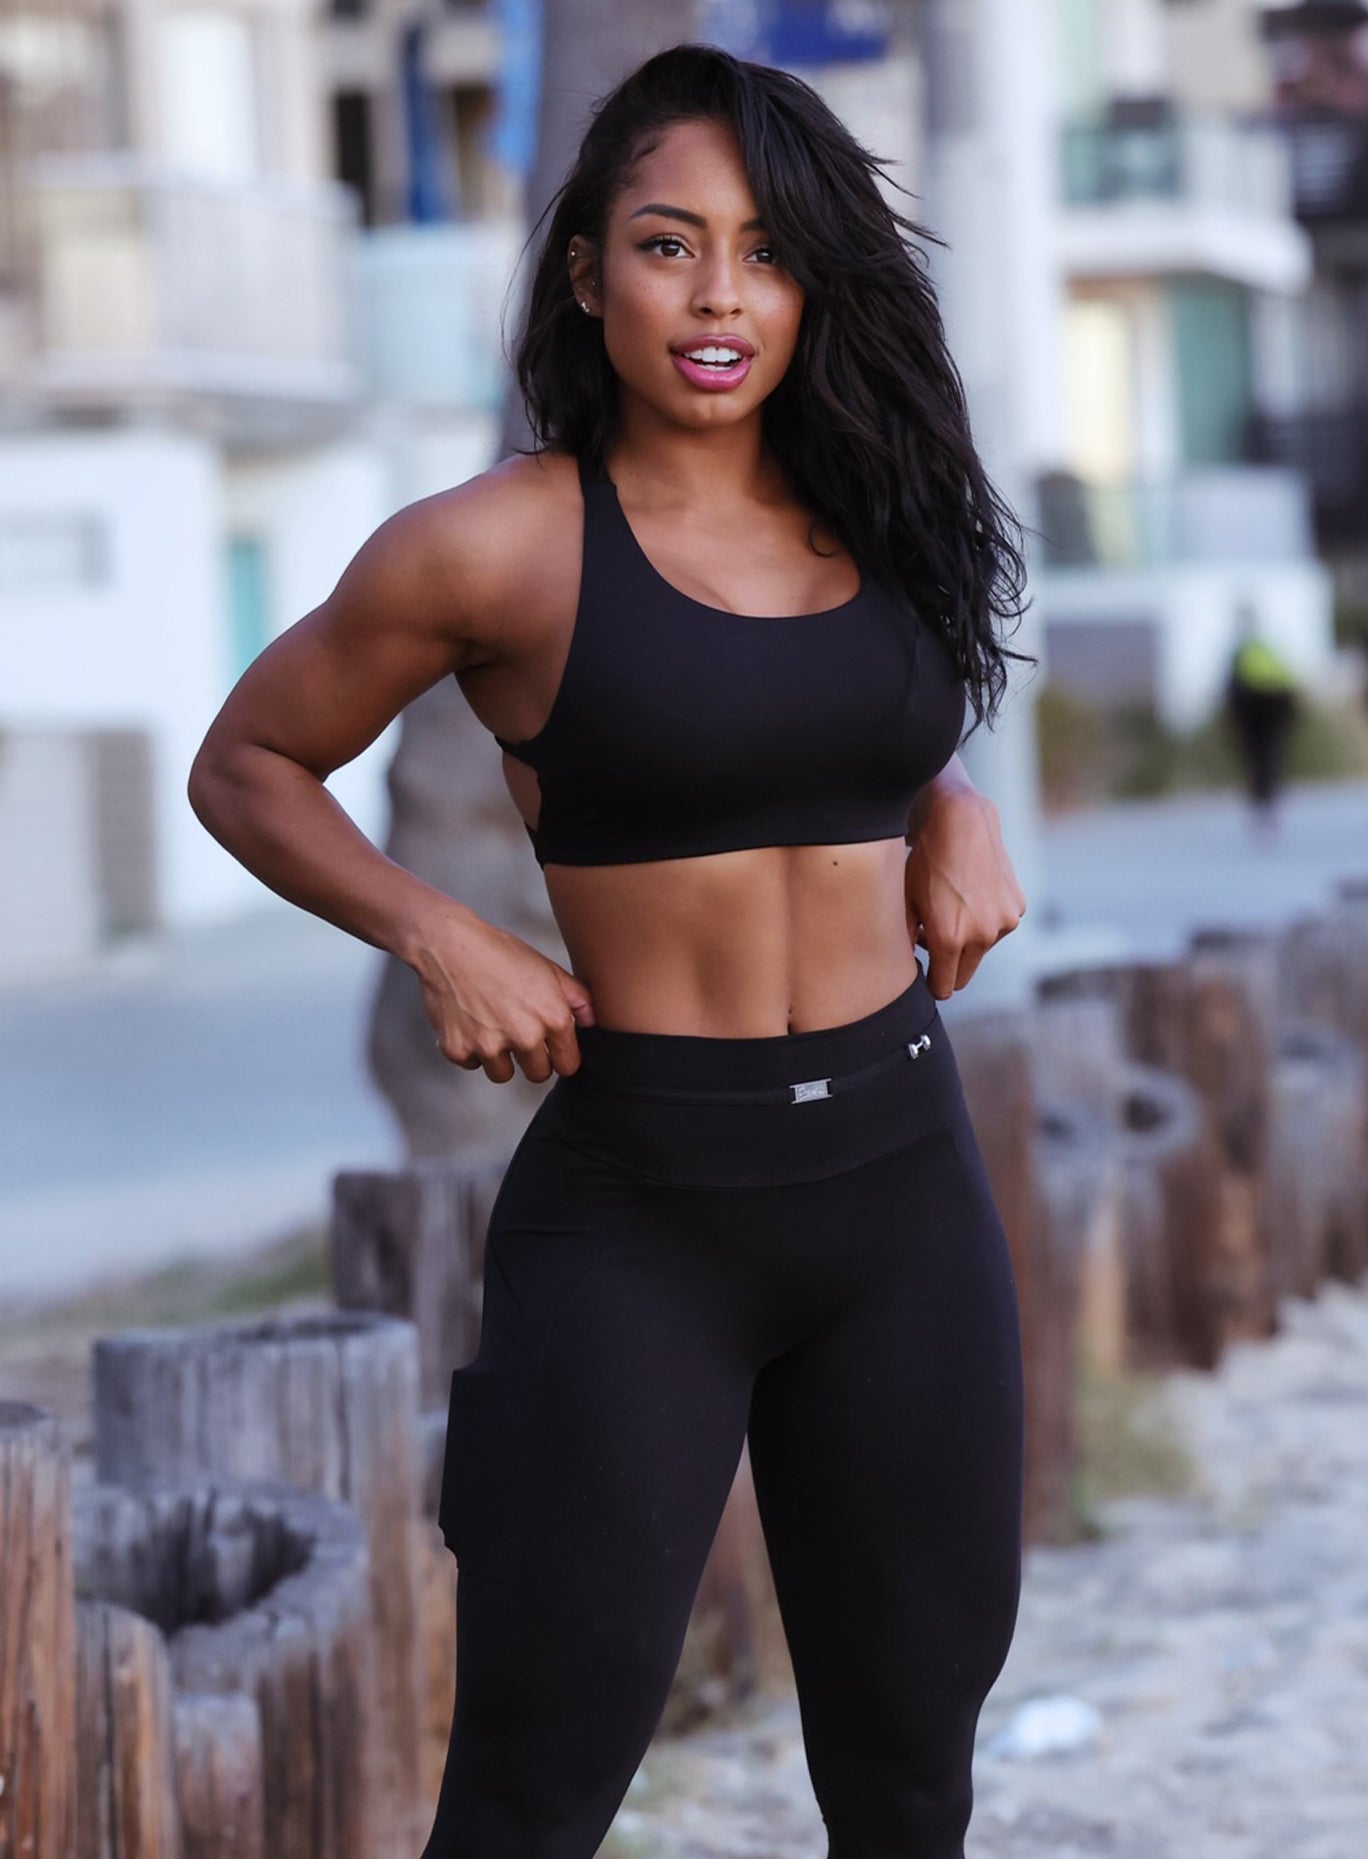 Front profile view of a model wearing our black barbell sports bra and a matching leggings